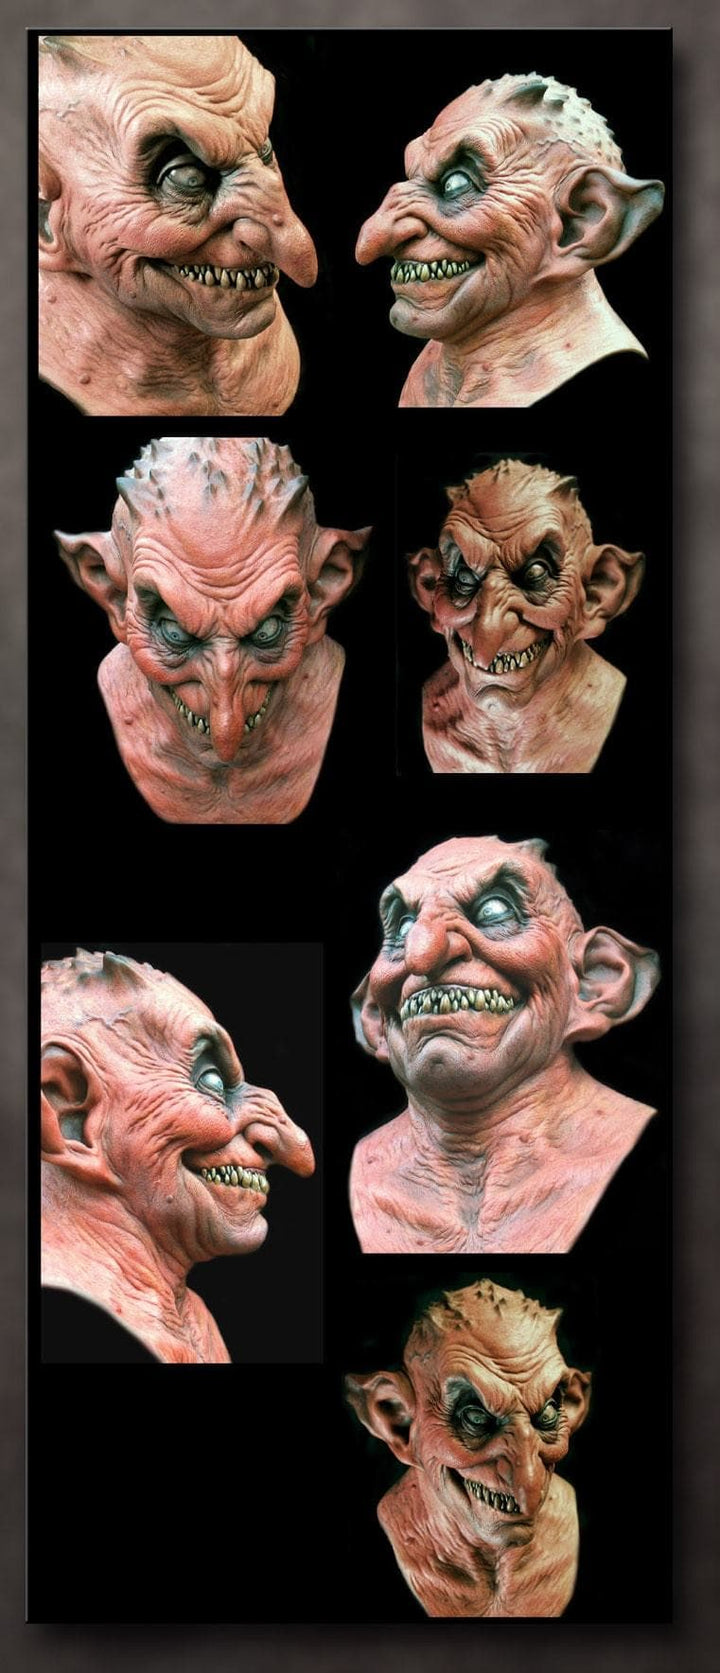 "Cerebus the Demented Troll" HD Studios Pro Halloween Mask Detailed view